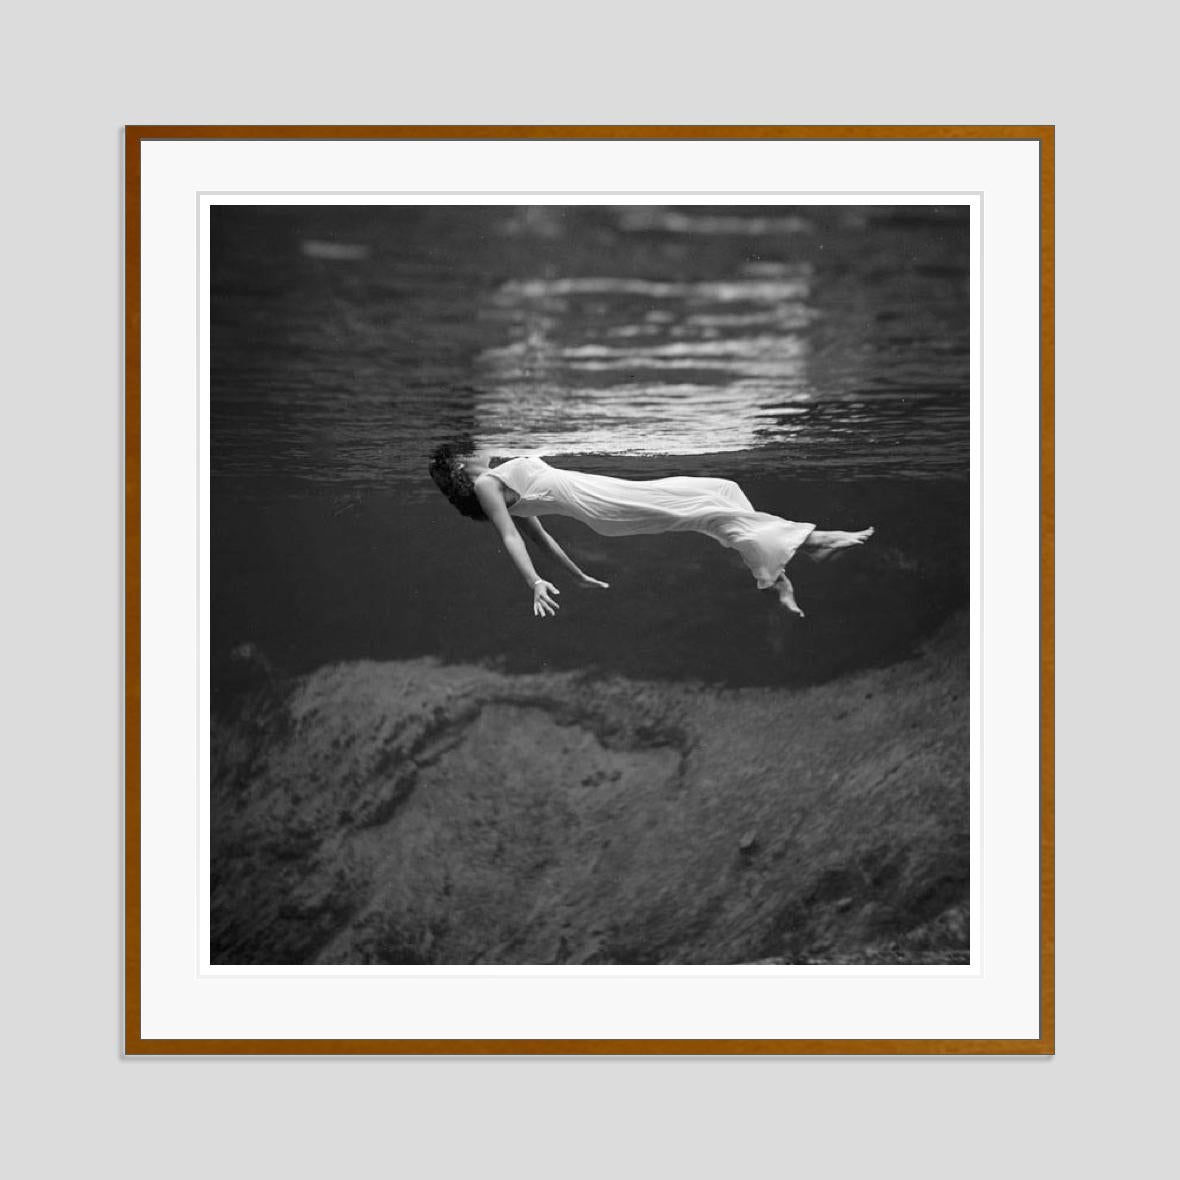 Floating 1947 Limited Signature Stamped Edition  - Photograph by Toni Frissell